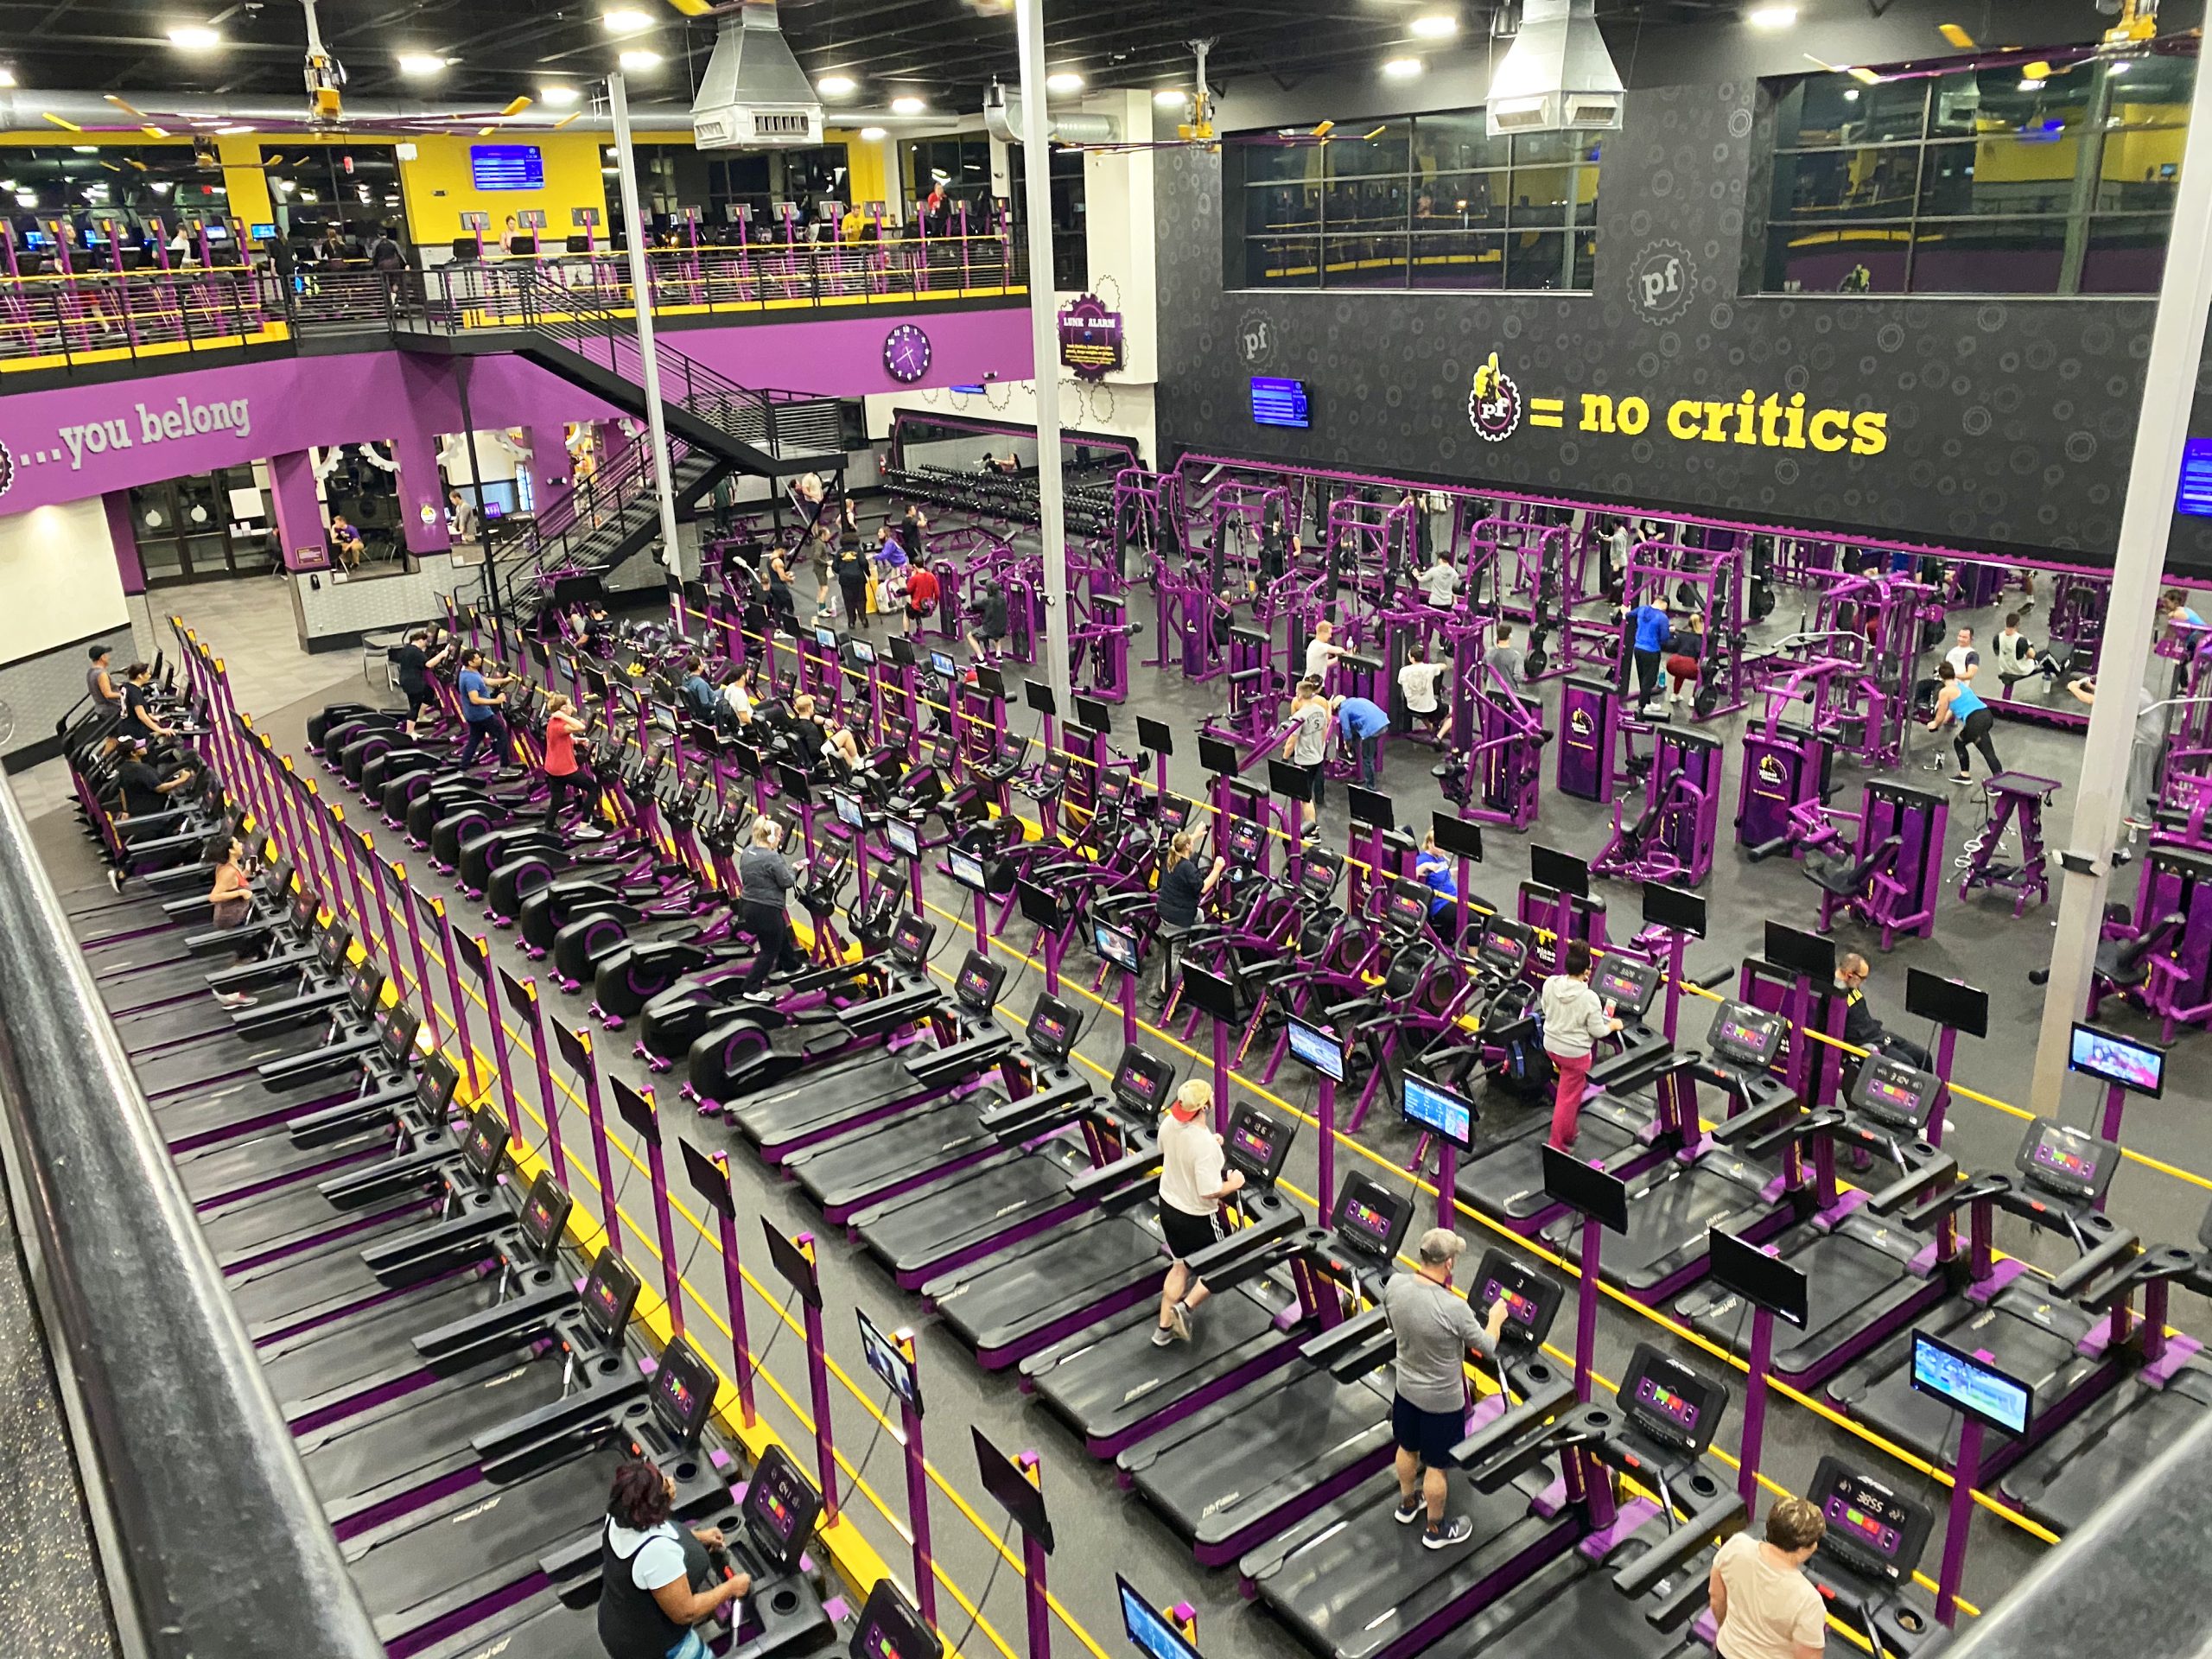 6 Day Will Planet Fitness Go Back To 24 Hours for Gym